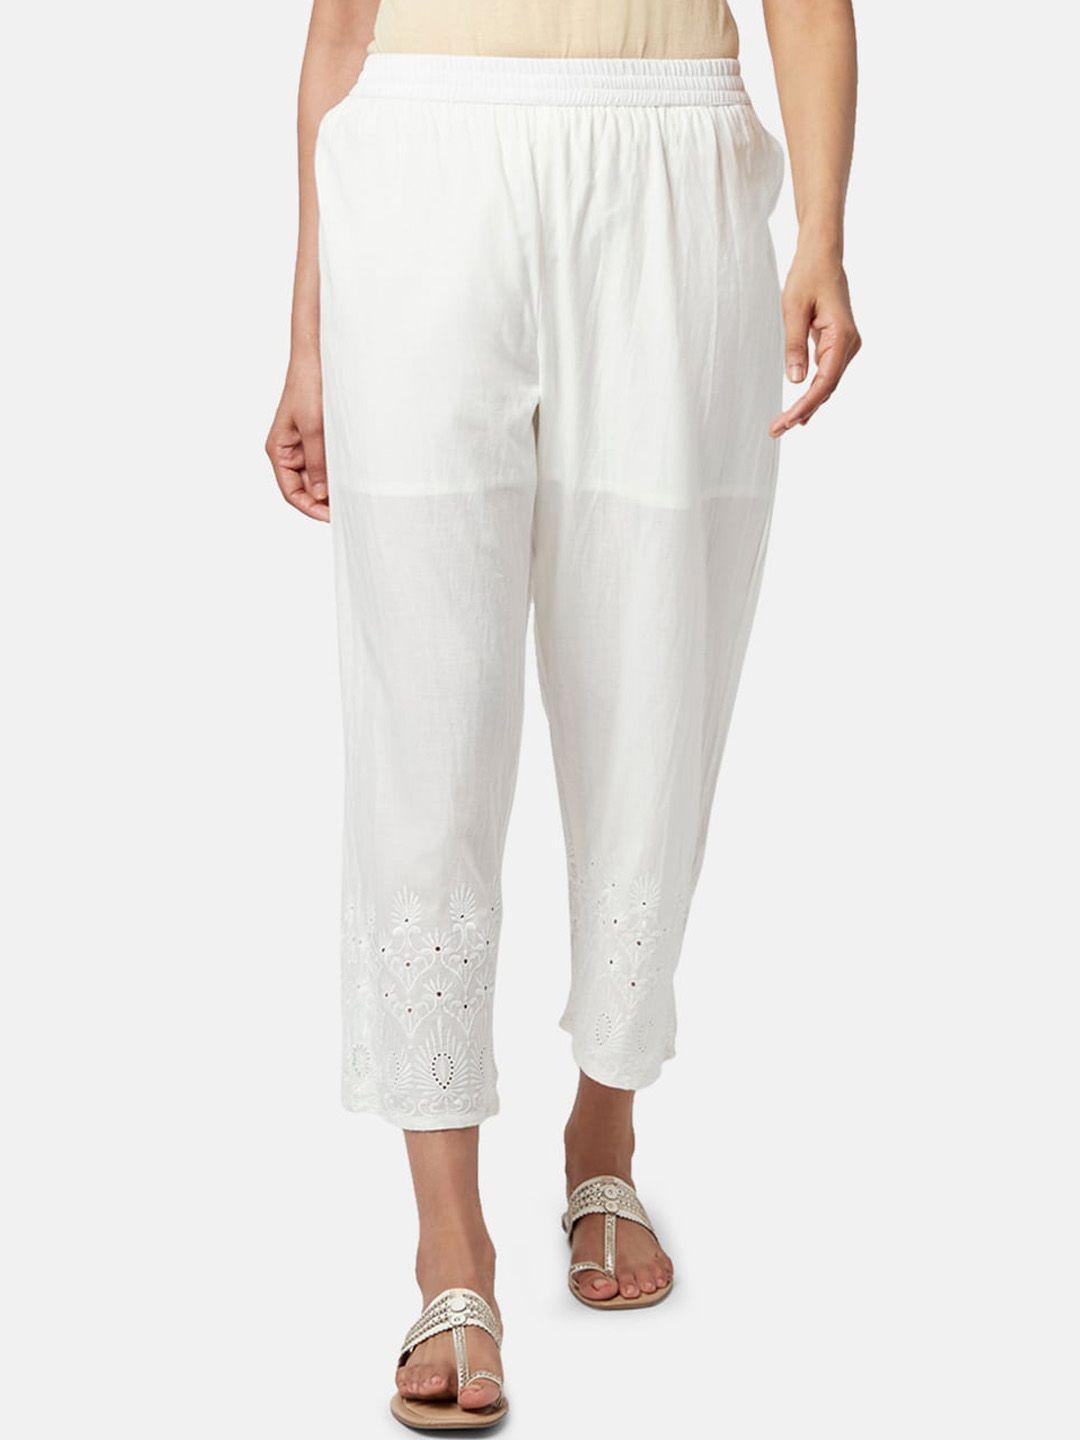 rangmanch-by-pantaloons-women-floral-embroidered-cotton-trousers